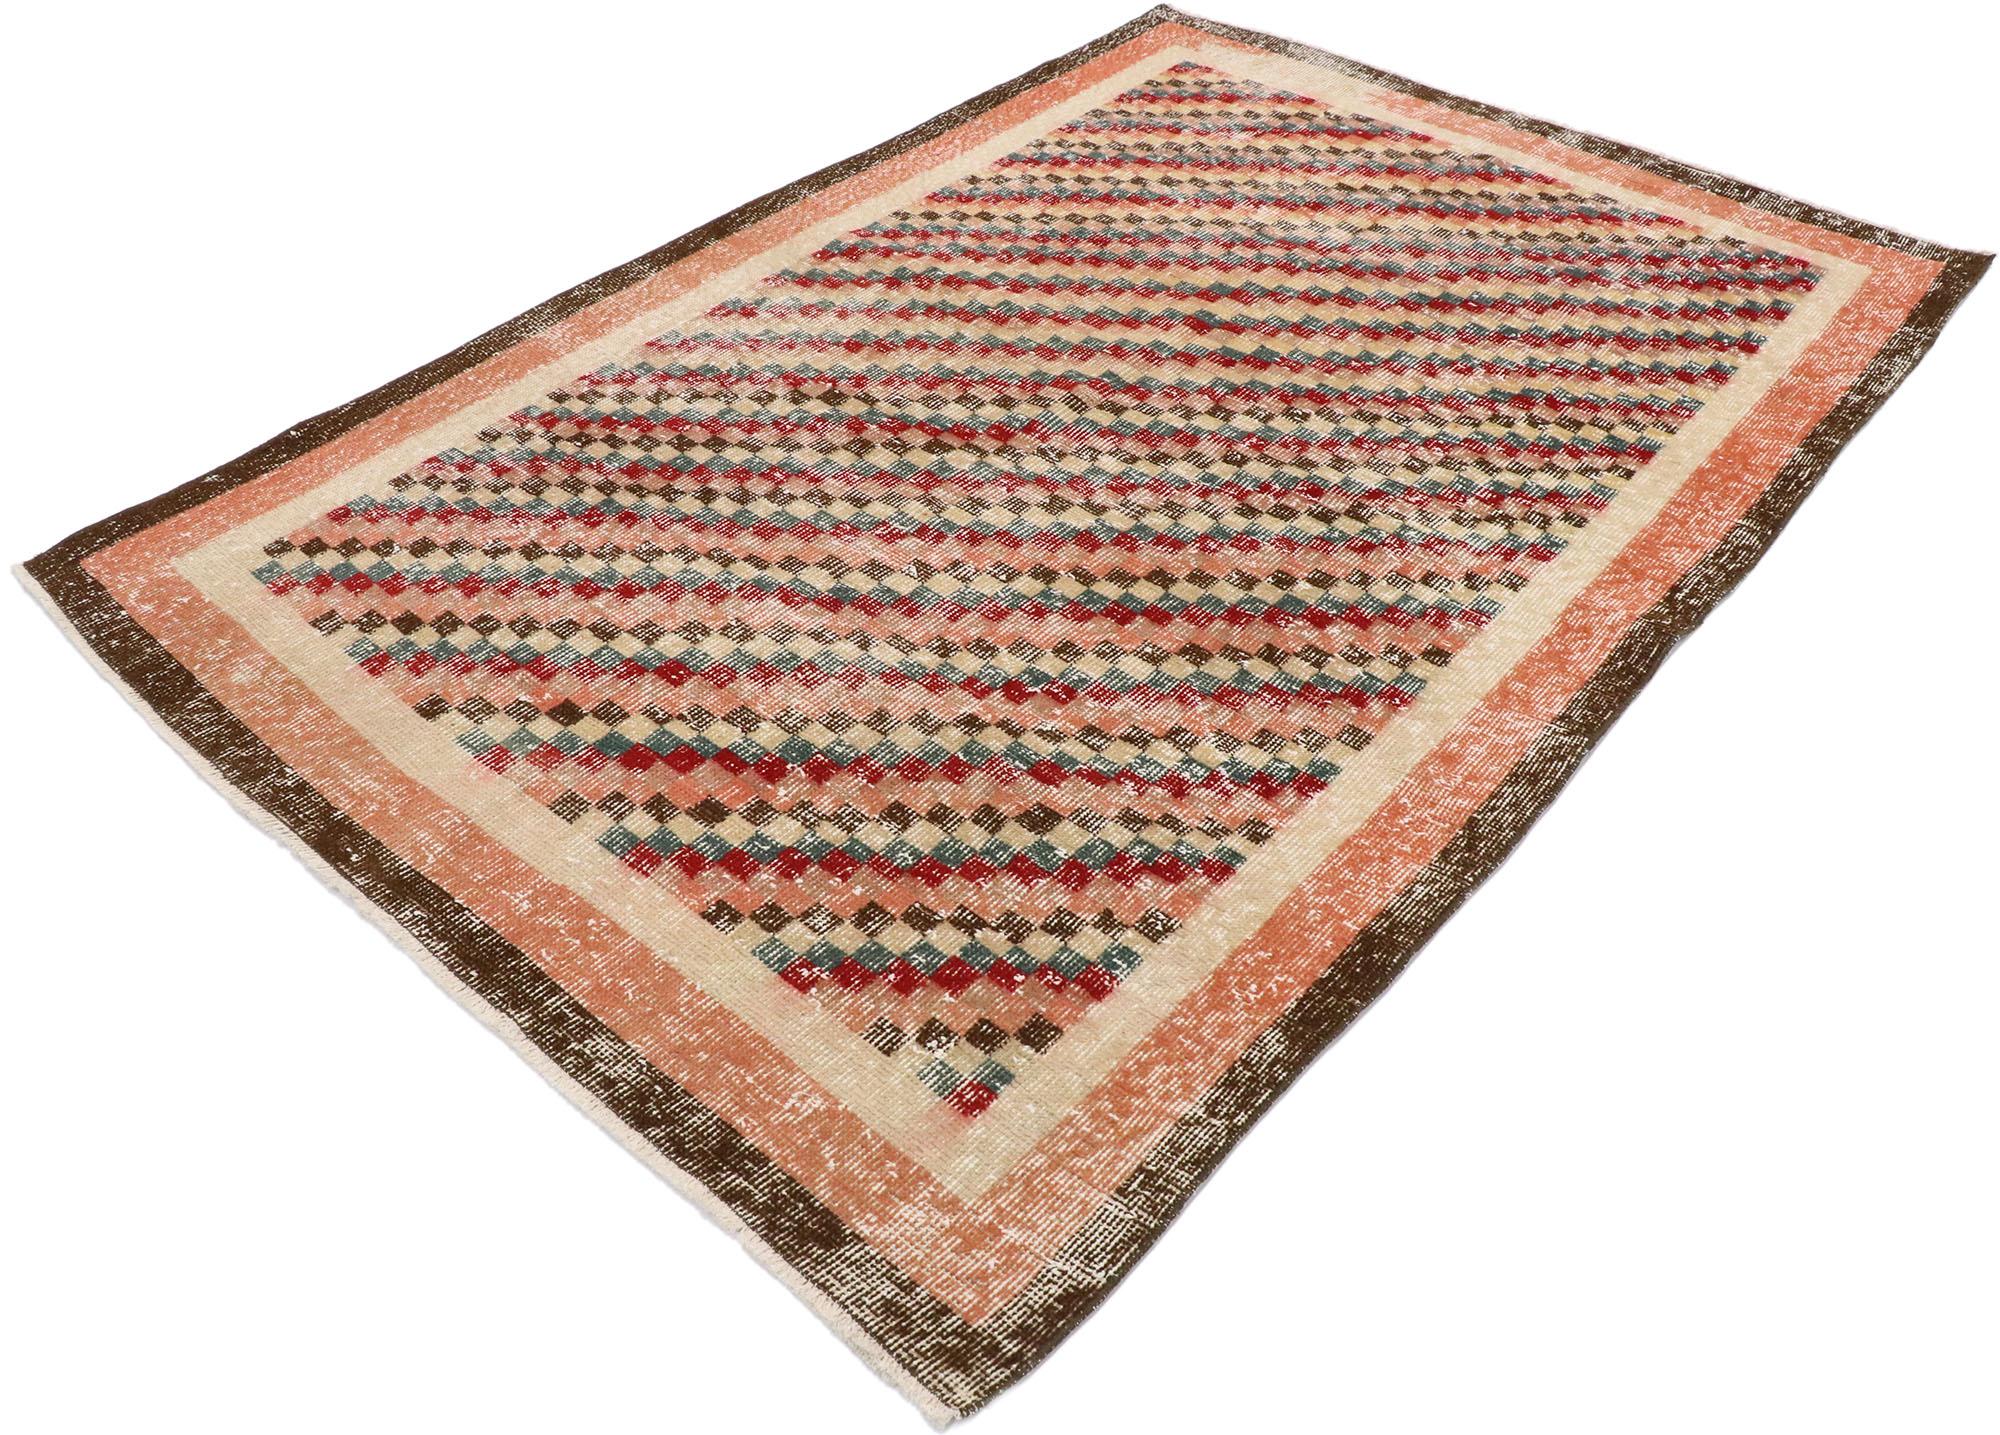 53366 Distressed Vintage Turkish Sivas Rug, 04'01 x 06'02. Nestled within the serene landscapes of Turkey's Sivas region, Zeki Muren Turkish Sivas rugs pay homage to the esteemed Turkish singer from whom they draw their name. Celebrated for their